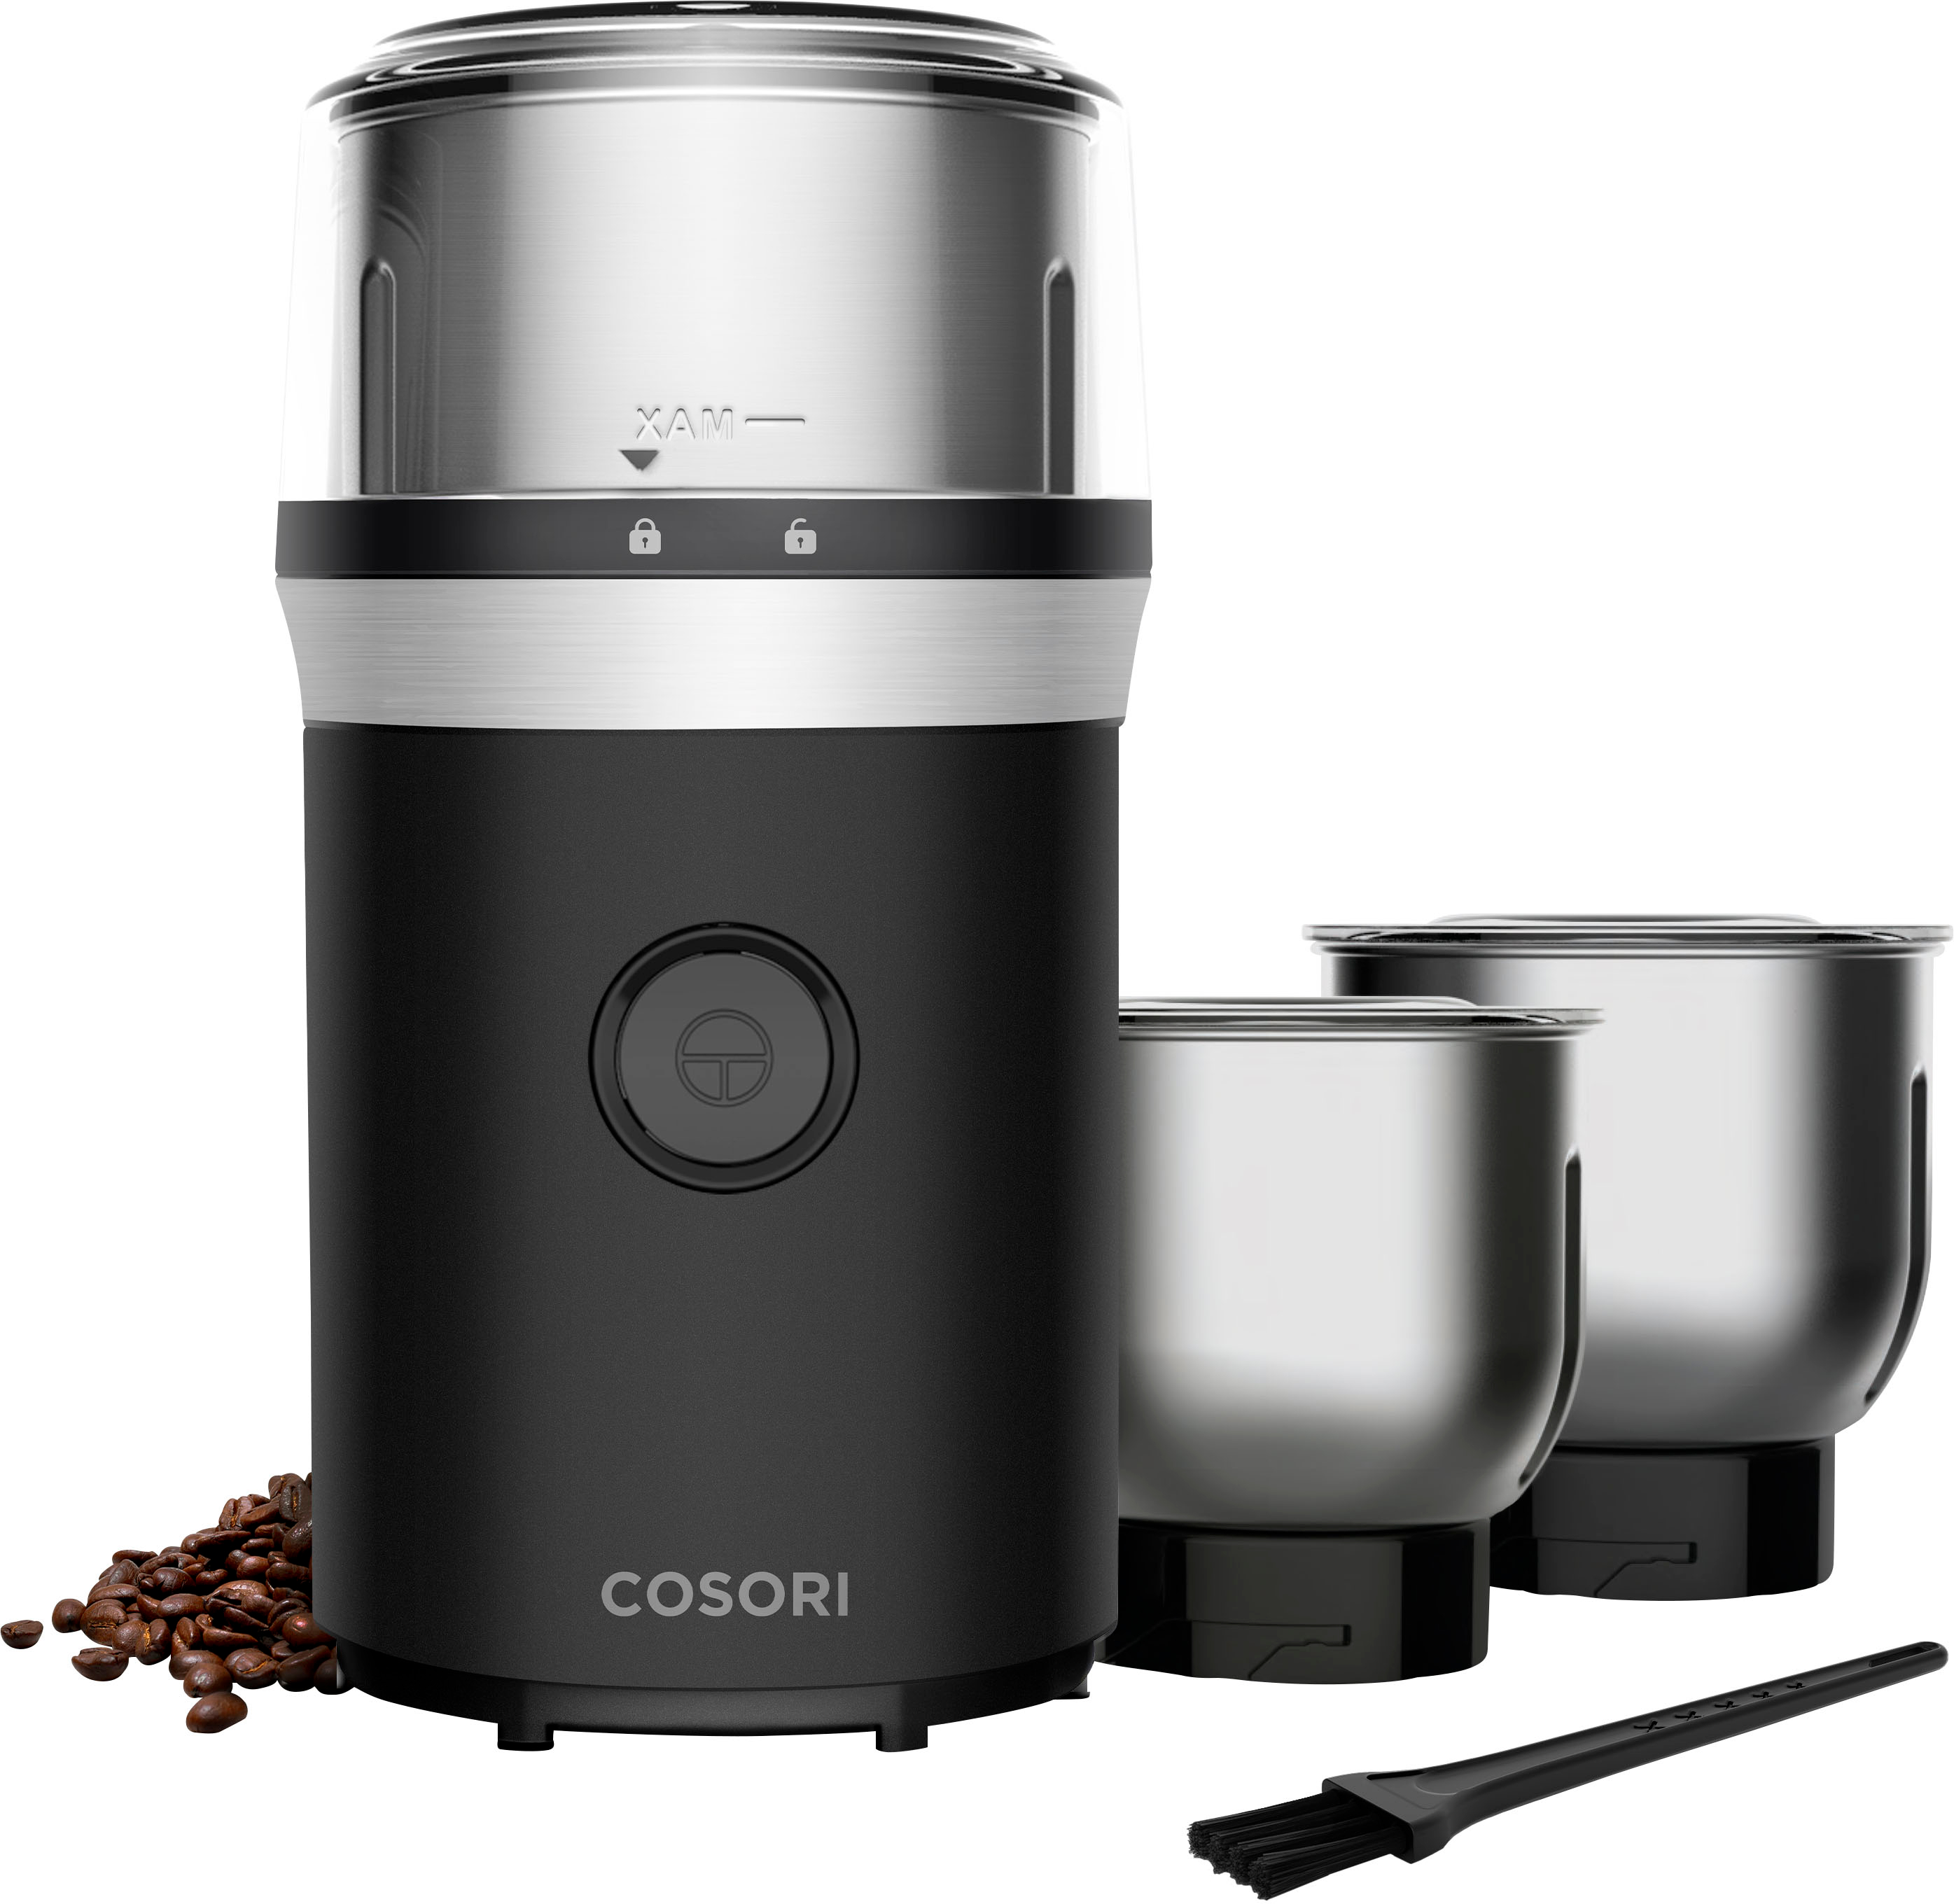 Cosori Electric Coffee Grinders for Spices, Seeds, Herbs, and Coffee Beans, Spice Blender and Espresso Grinder, Wet and Dry Grinder, Black